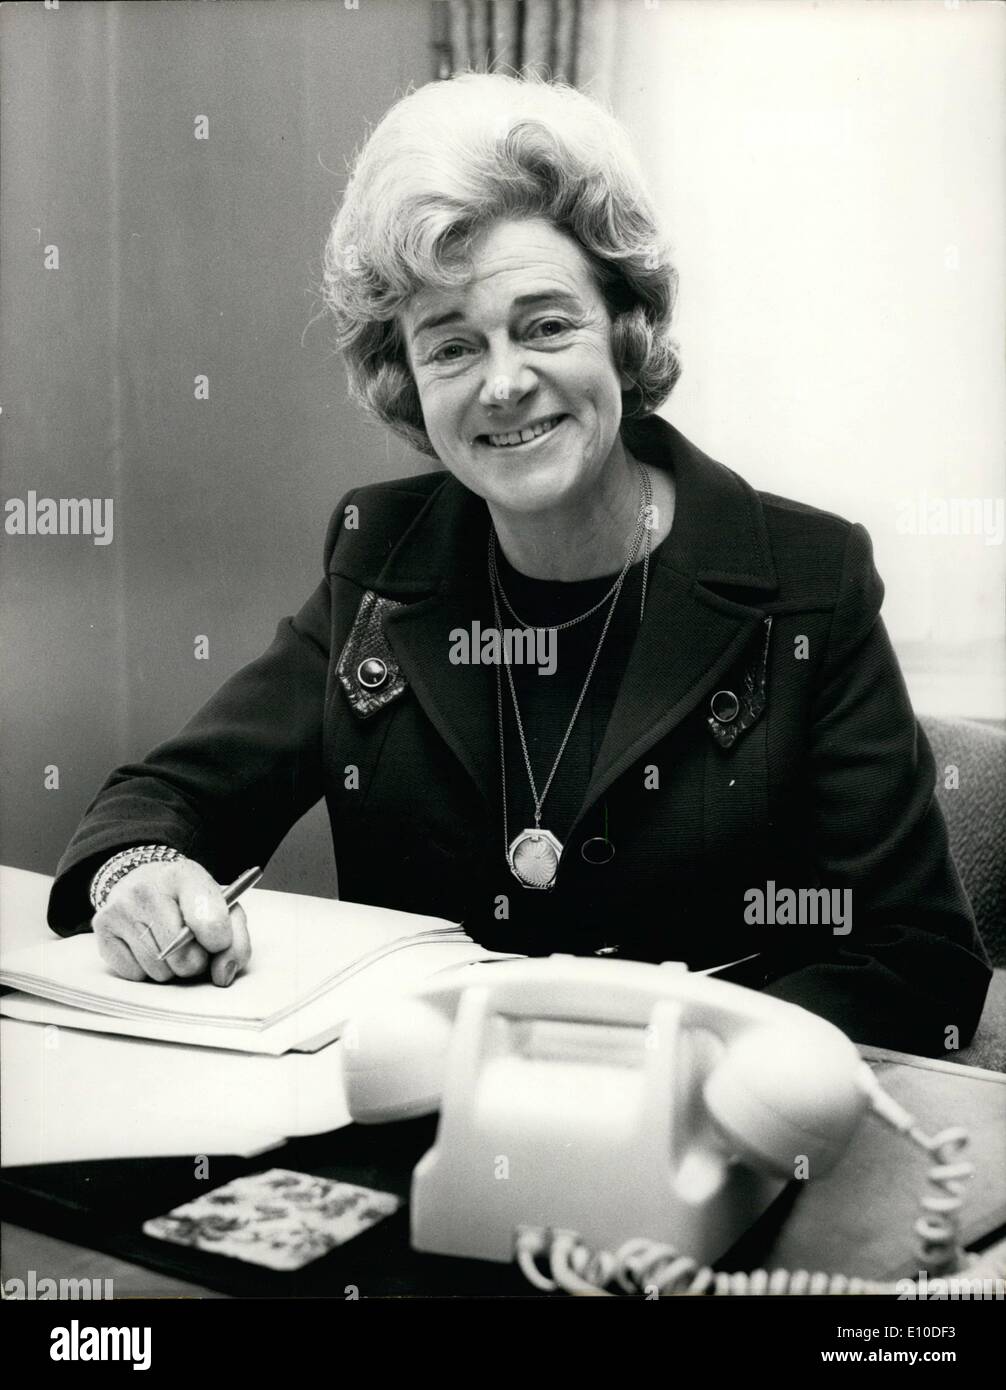 Jul. 07, 1972 - Woman Is Setary Of Horserace Betting Levy Board. Photo shows Miss Margaret Meade, 52, who has been appointed Stock Photo